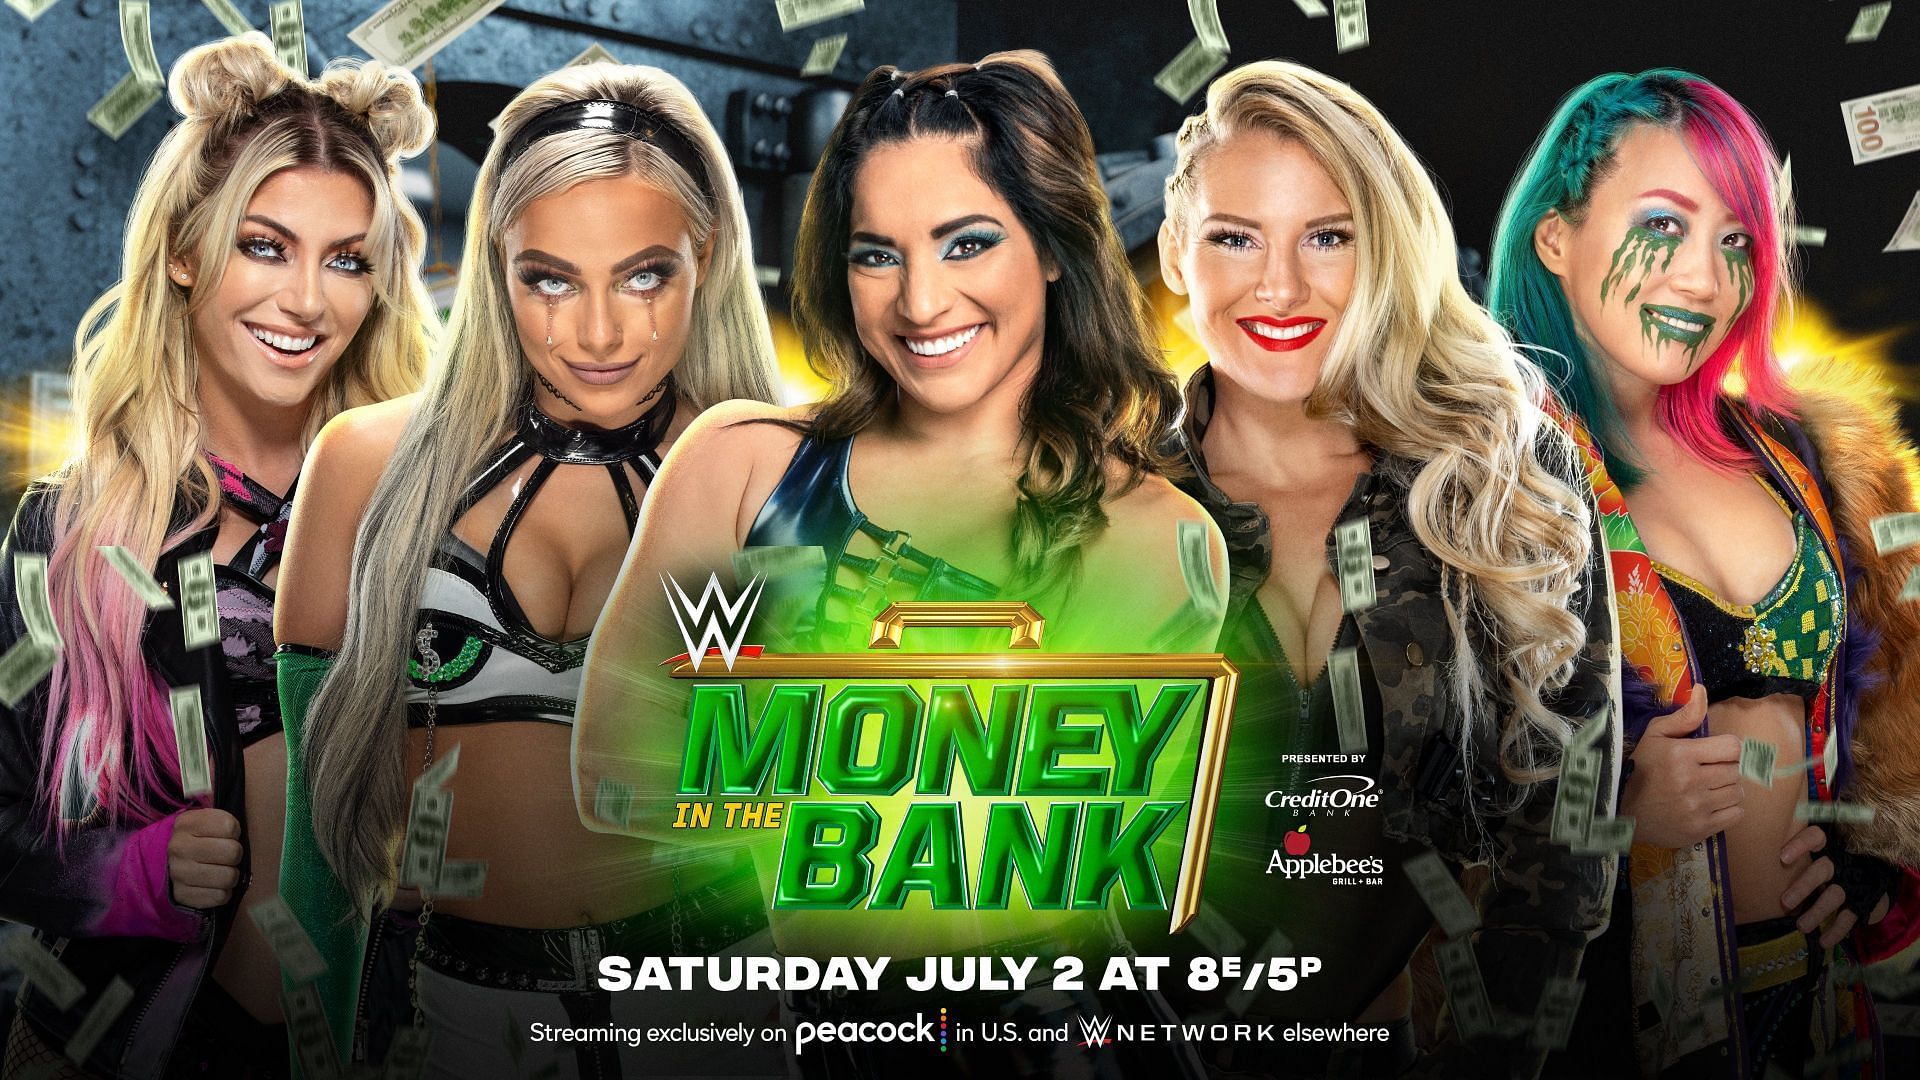 The Money in the Bank competitors